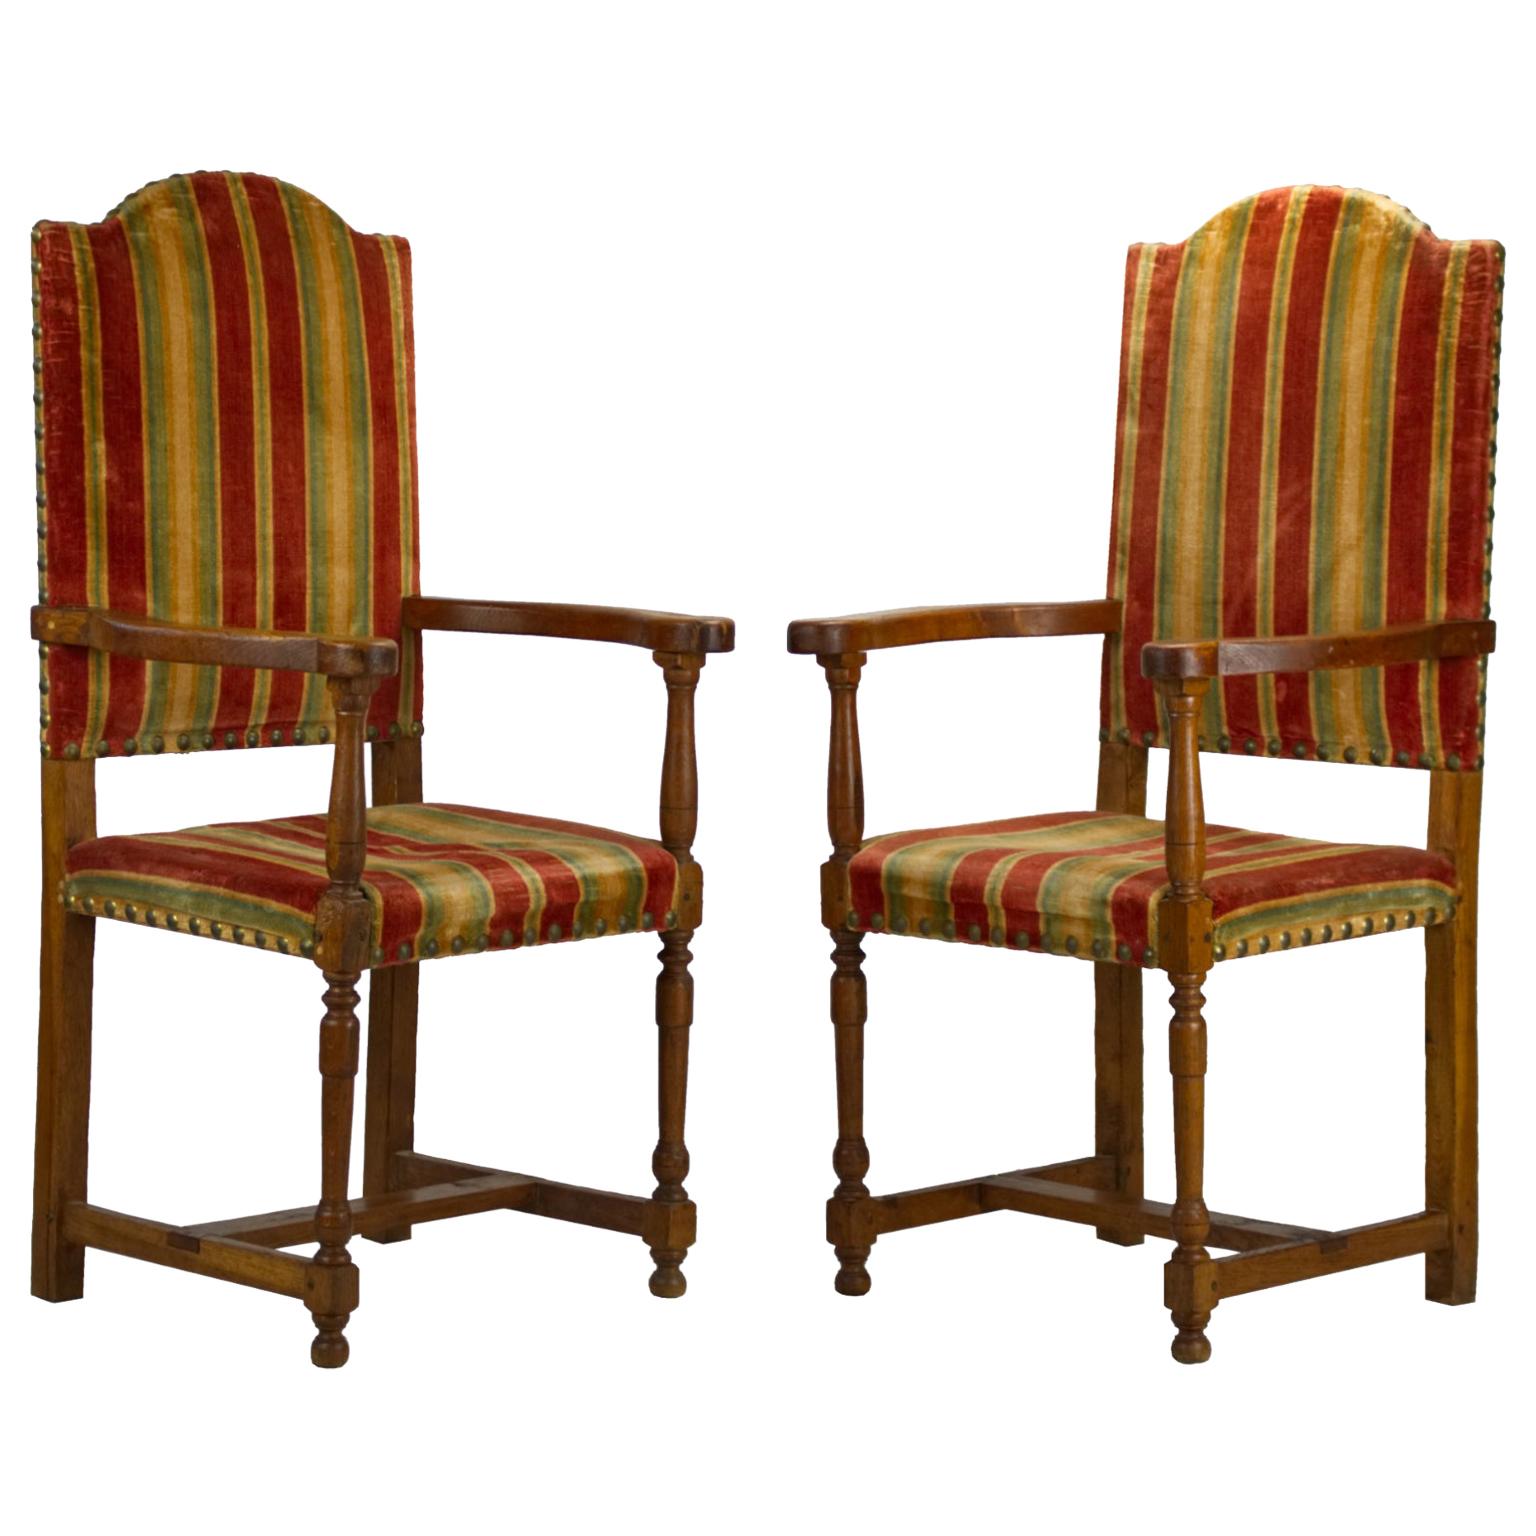 Pair of 18th Century Louis XIII Antique Armchairs